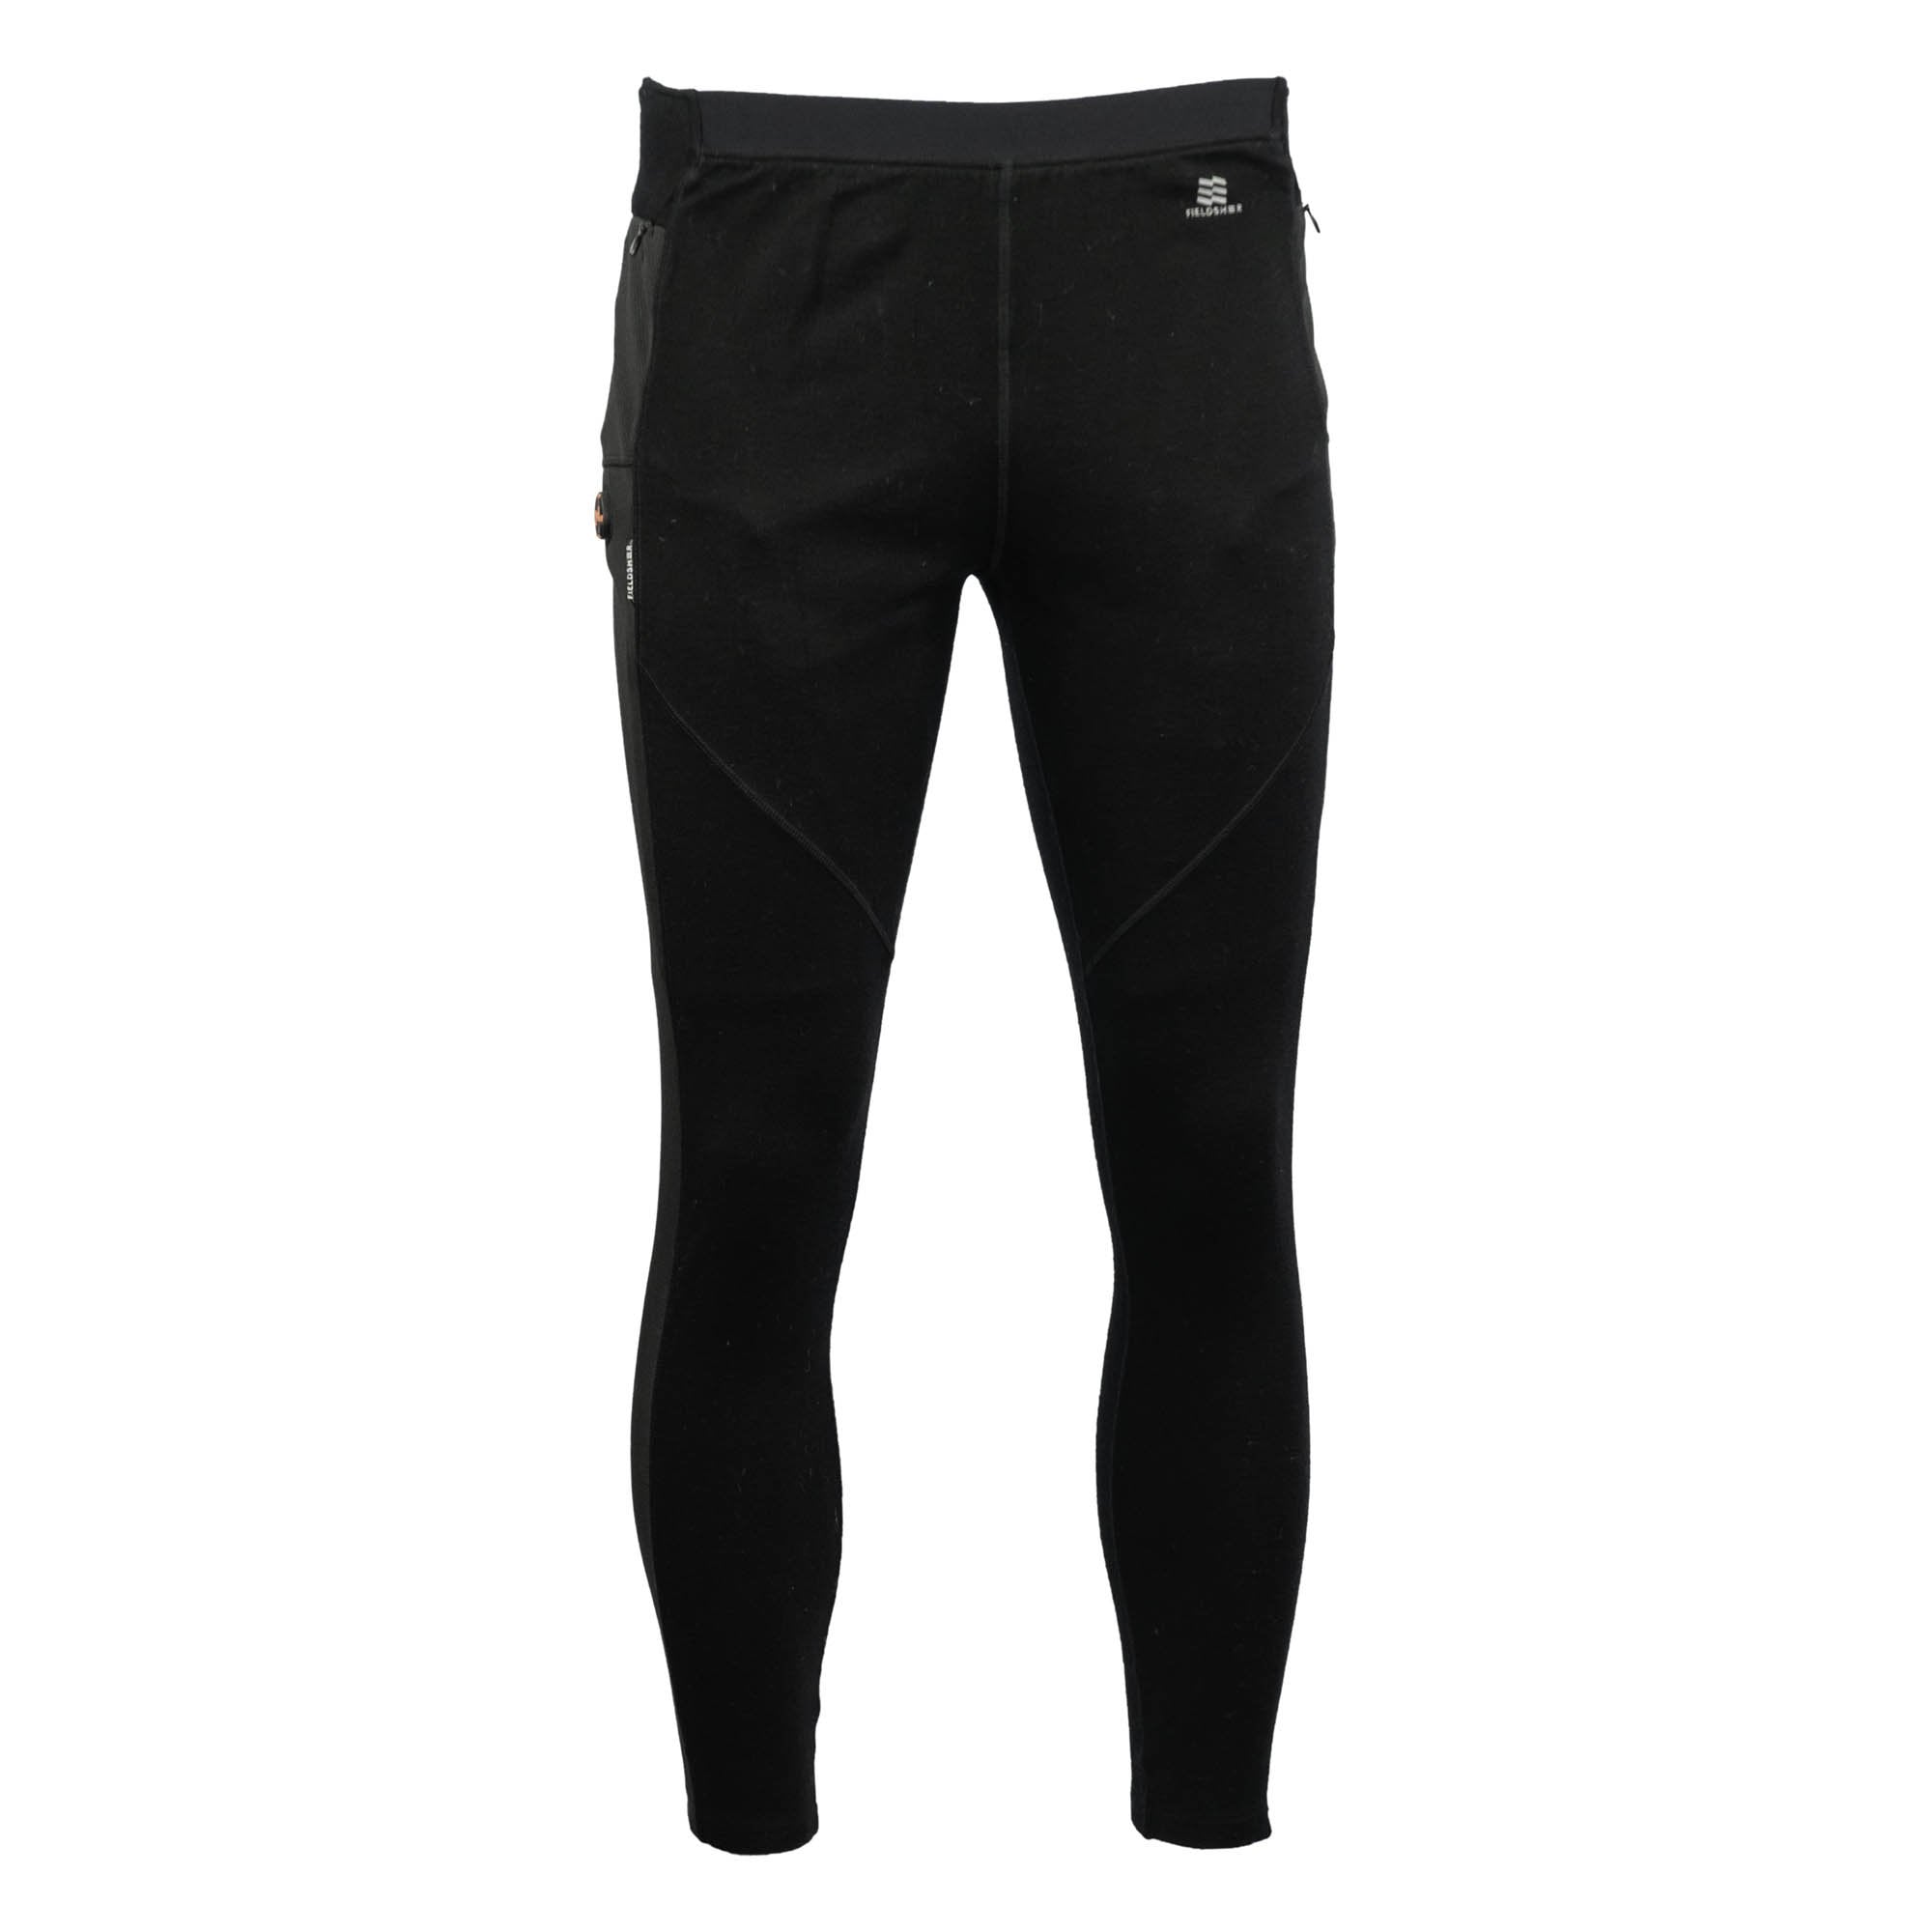 Mobile Warming Technology Baselayers Thermick Baselayer Pant Women's Heated  Clothing